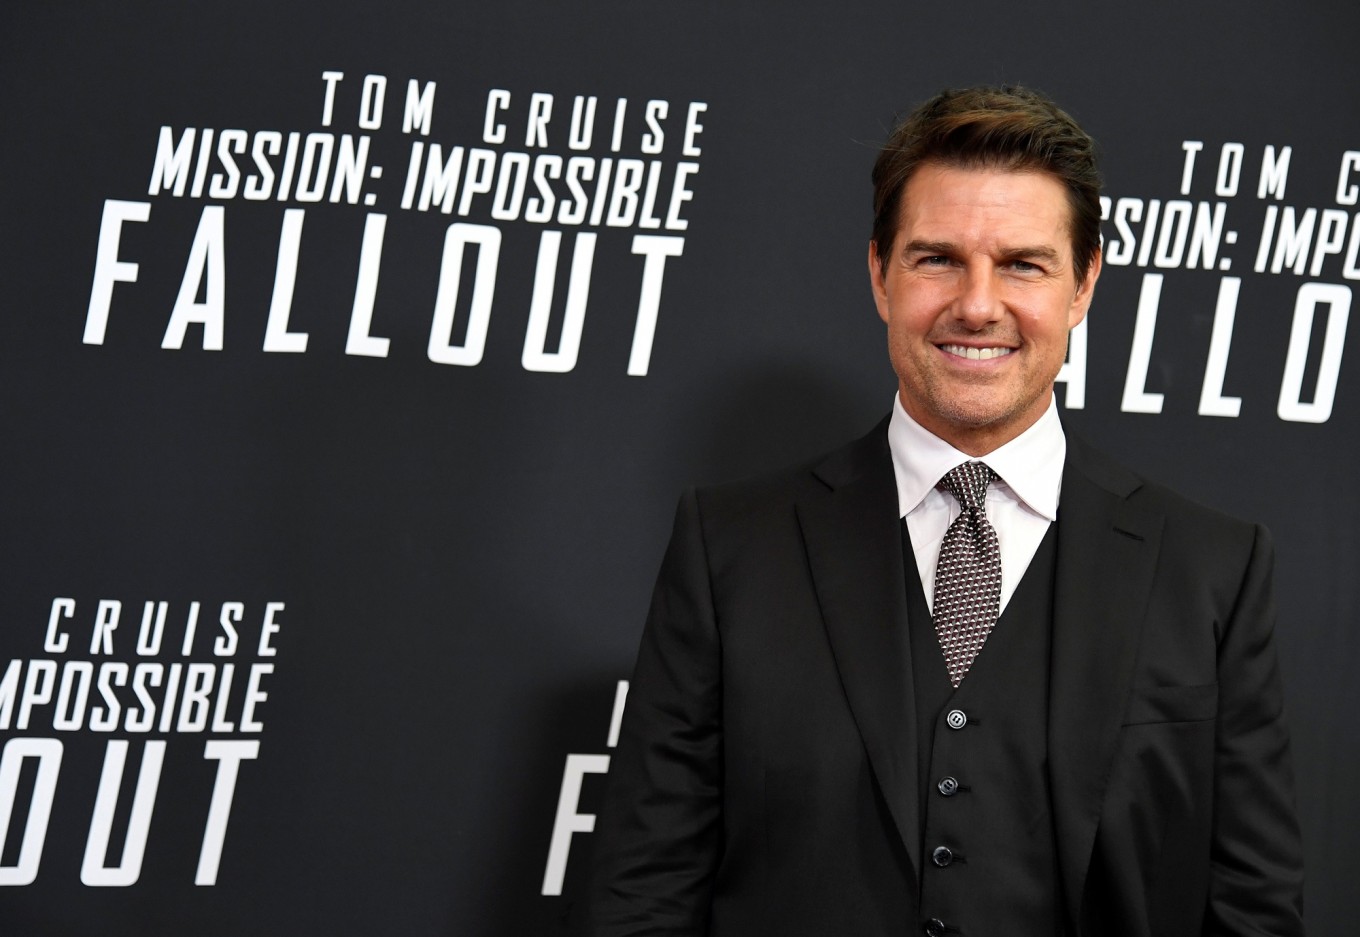 Mission Impossible Fallout Parents Guide / Imdb Mission Impossible